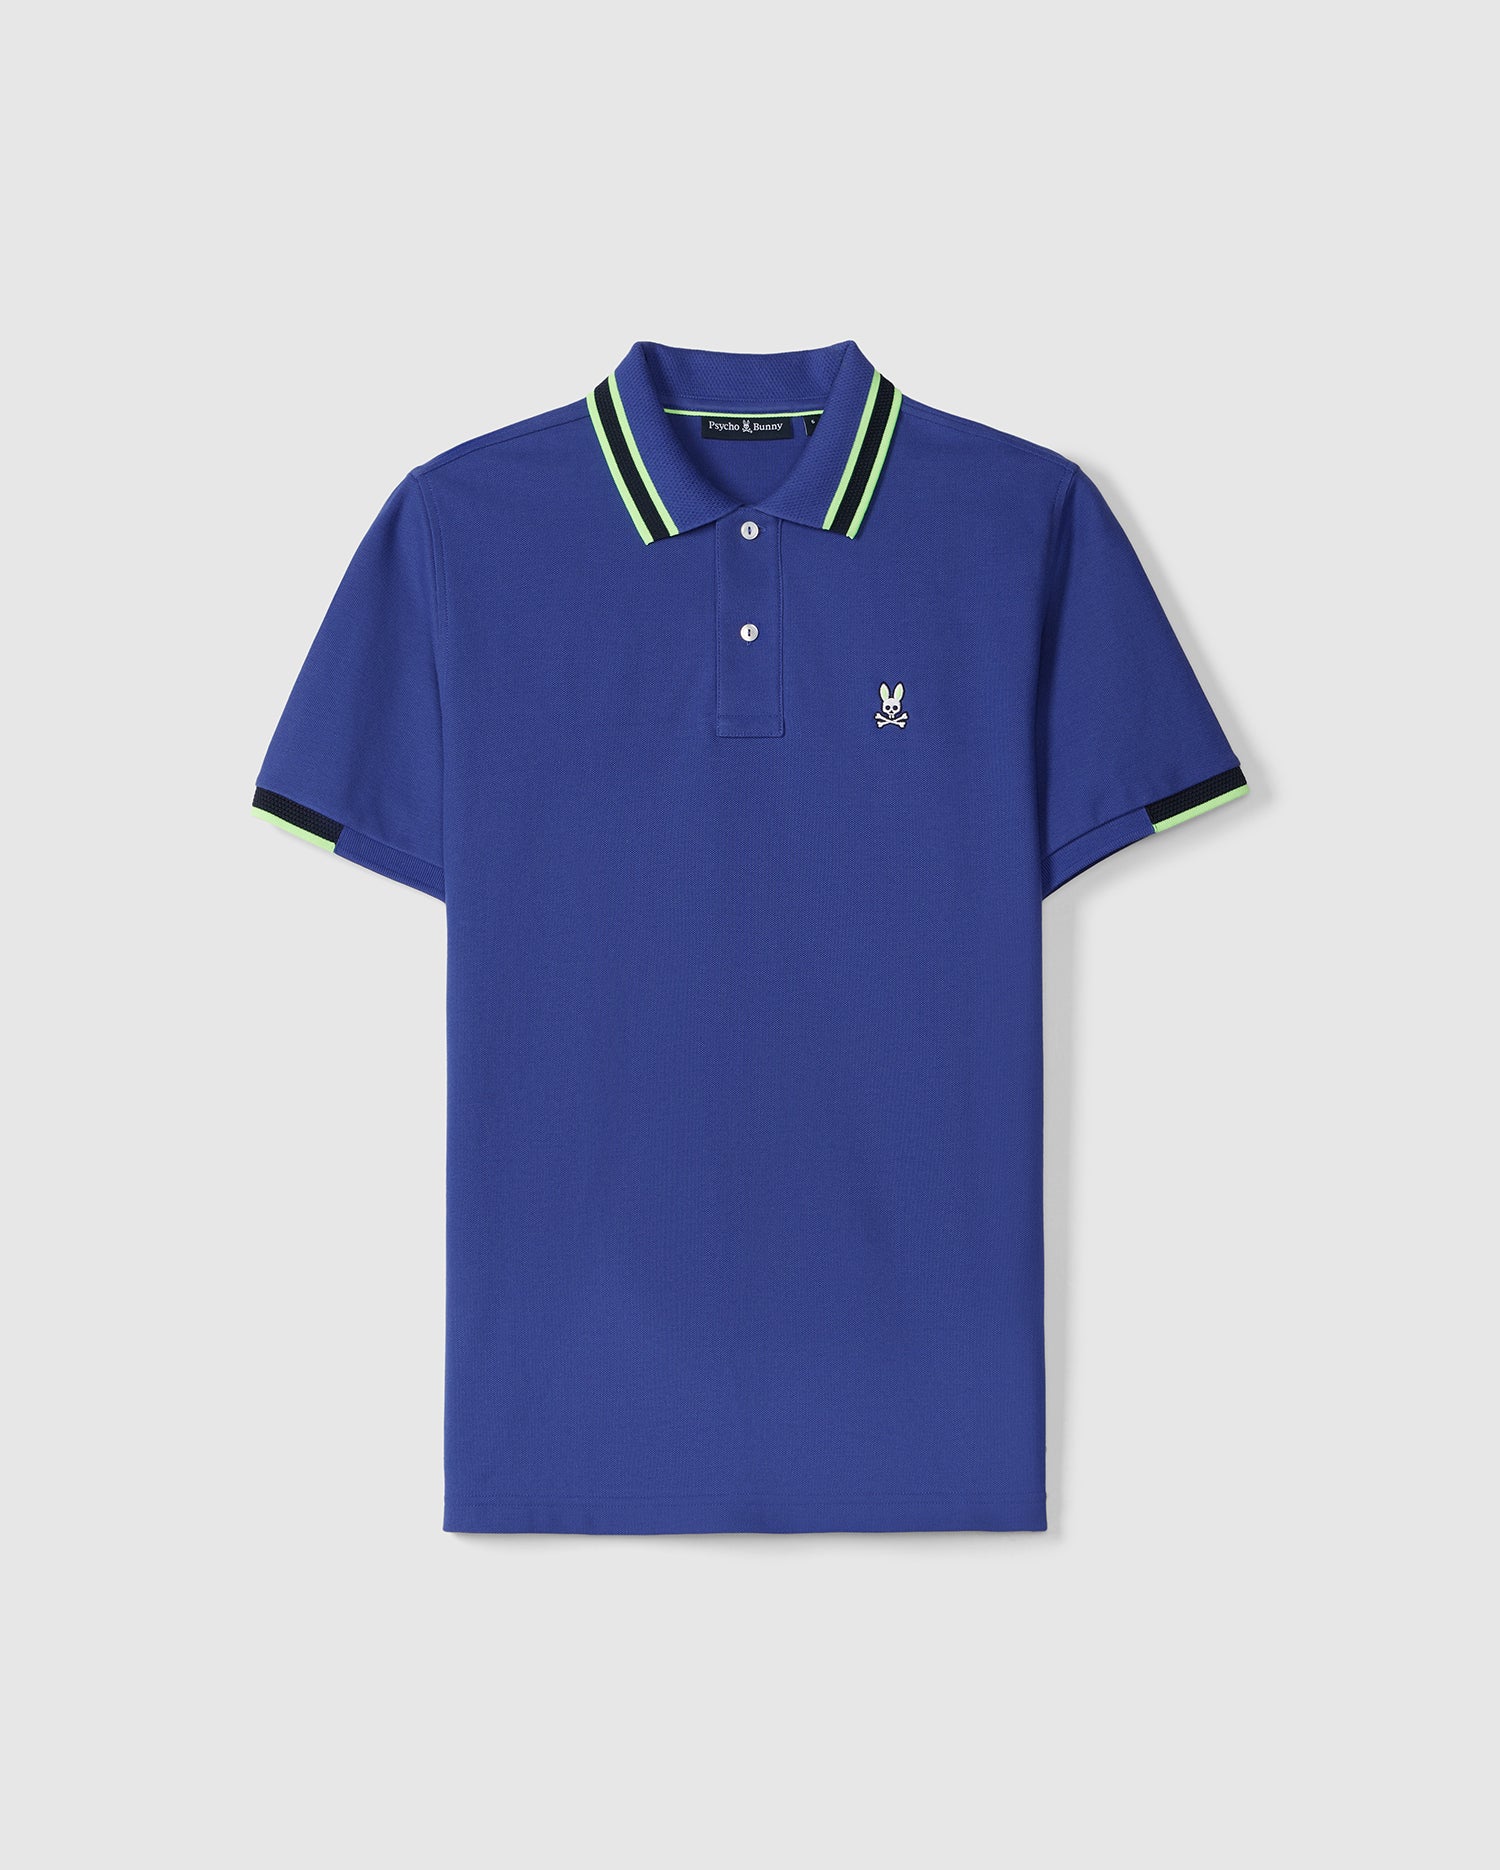 Navy blue Psycho Bunny Pima cotton polo shirt with a textured-knit green and yellow striped collar and sleeve bands, featuring a small white embroidered logo on the chest. The shirt is displayed against a plain white background.